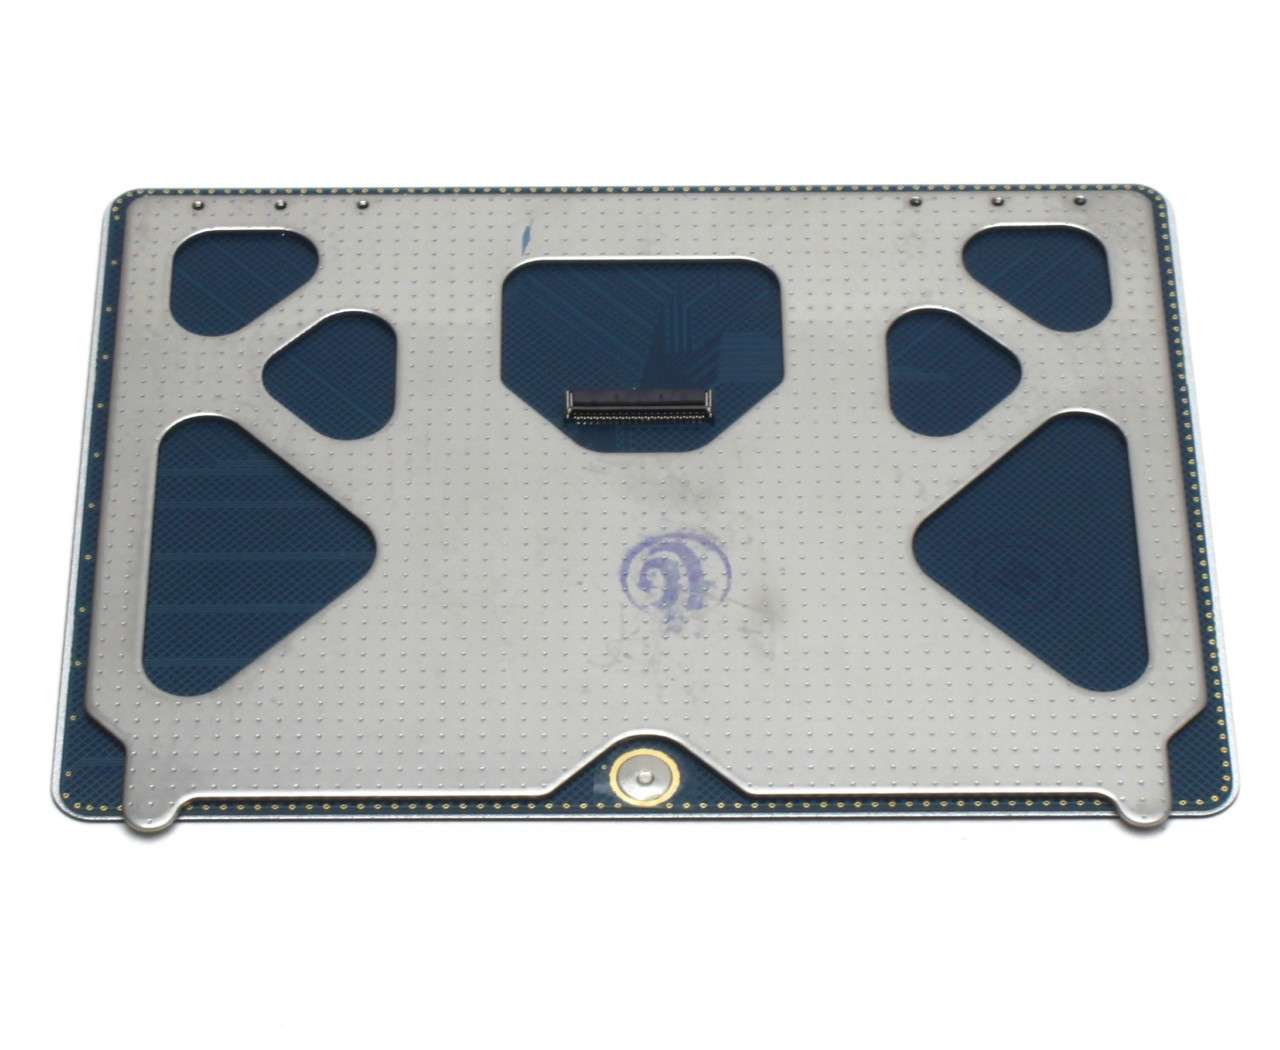 Touchpad Apple Macbook Pro 17 A1297 Early 2011 Trackpad image9